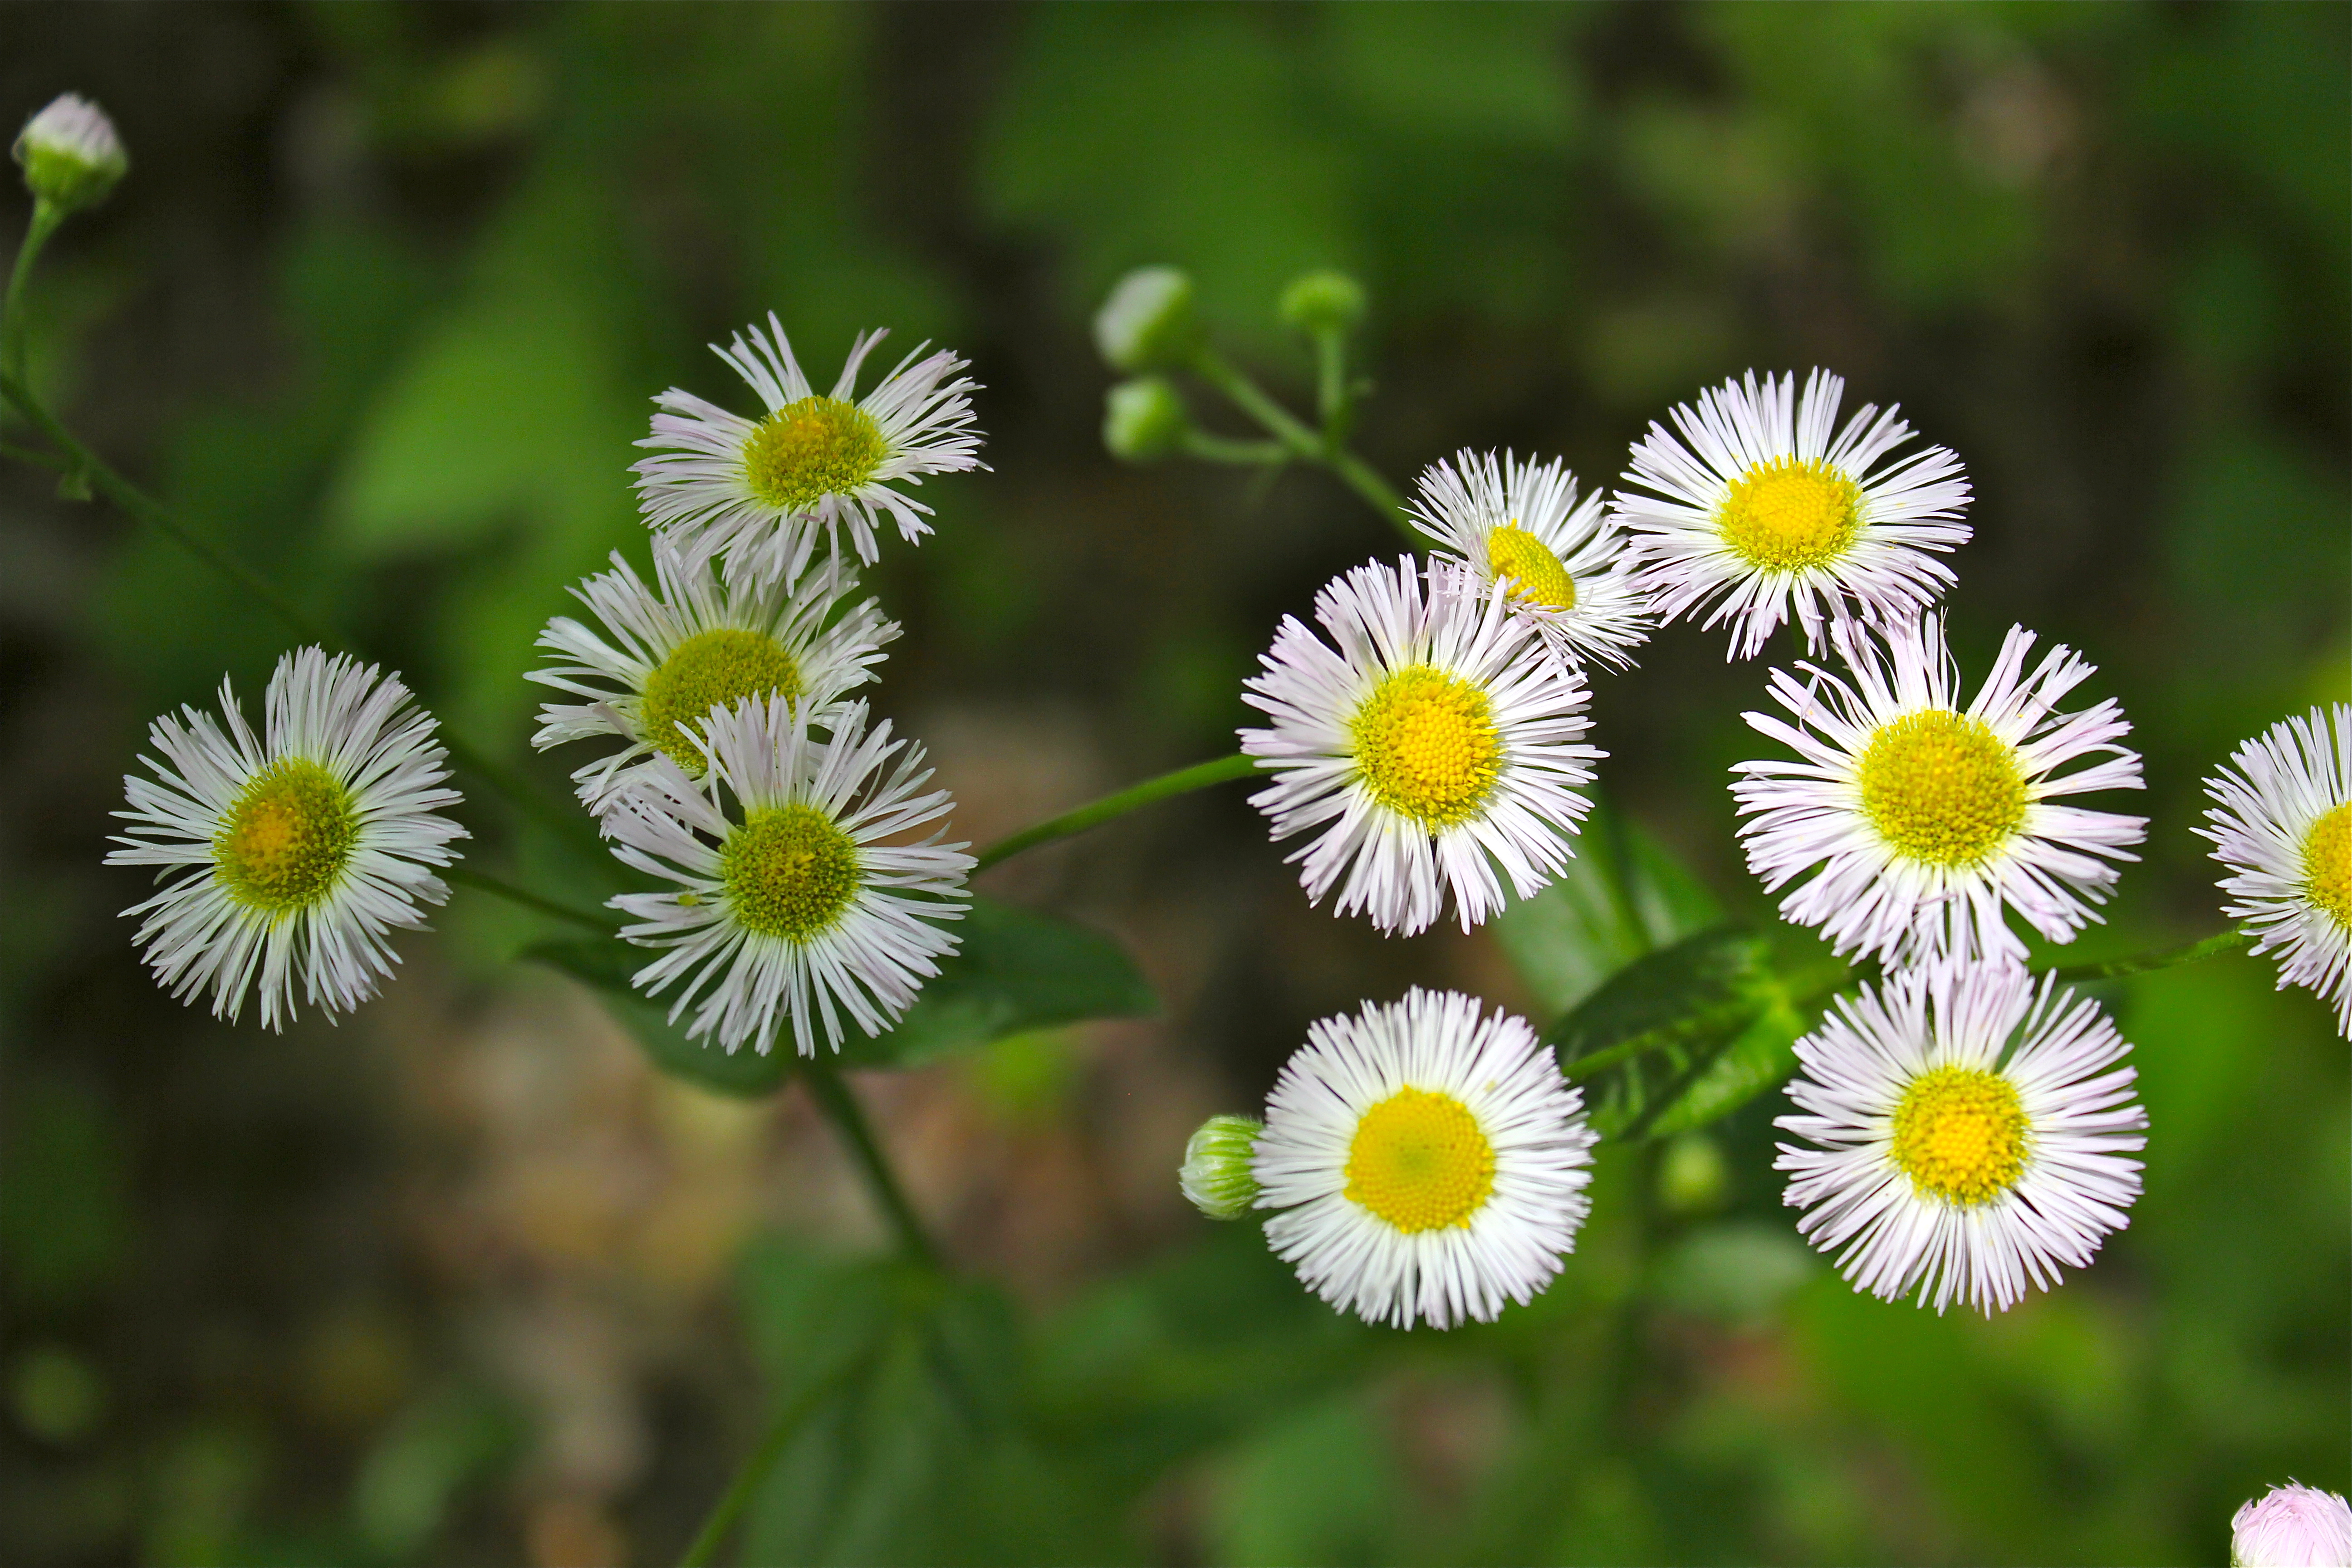 Little Daisy Flowers Image collections - Flower Wallpaper HD